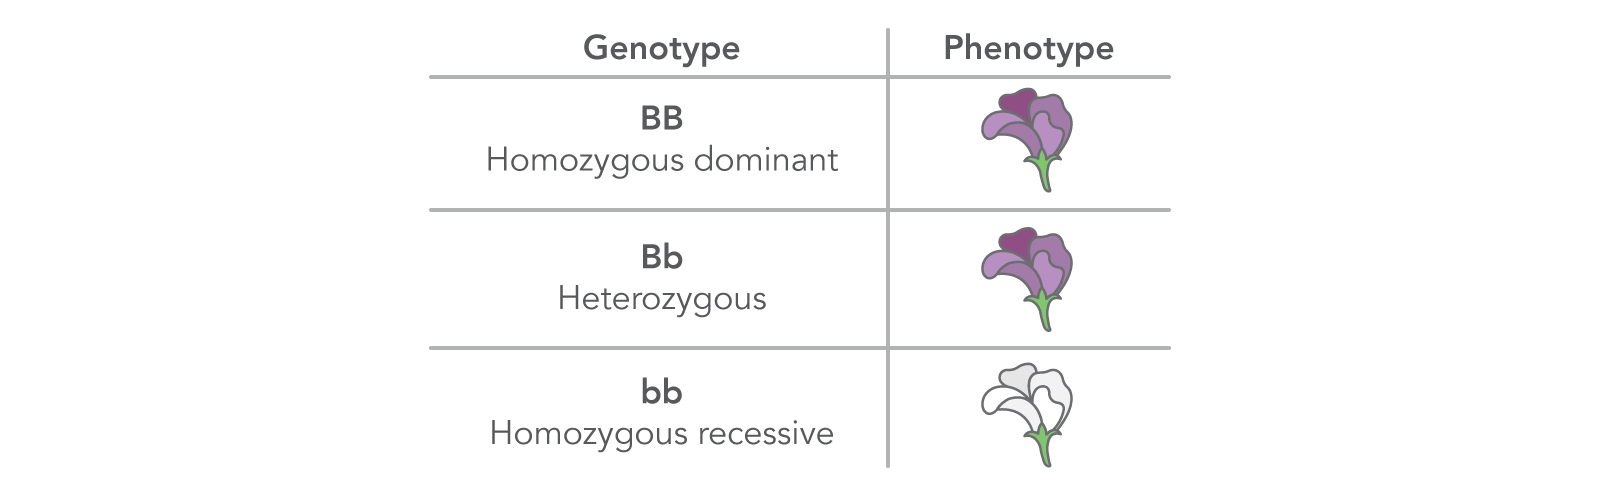 Different genotypes can result in distinct phenotypes.